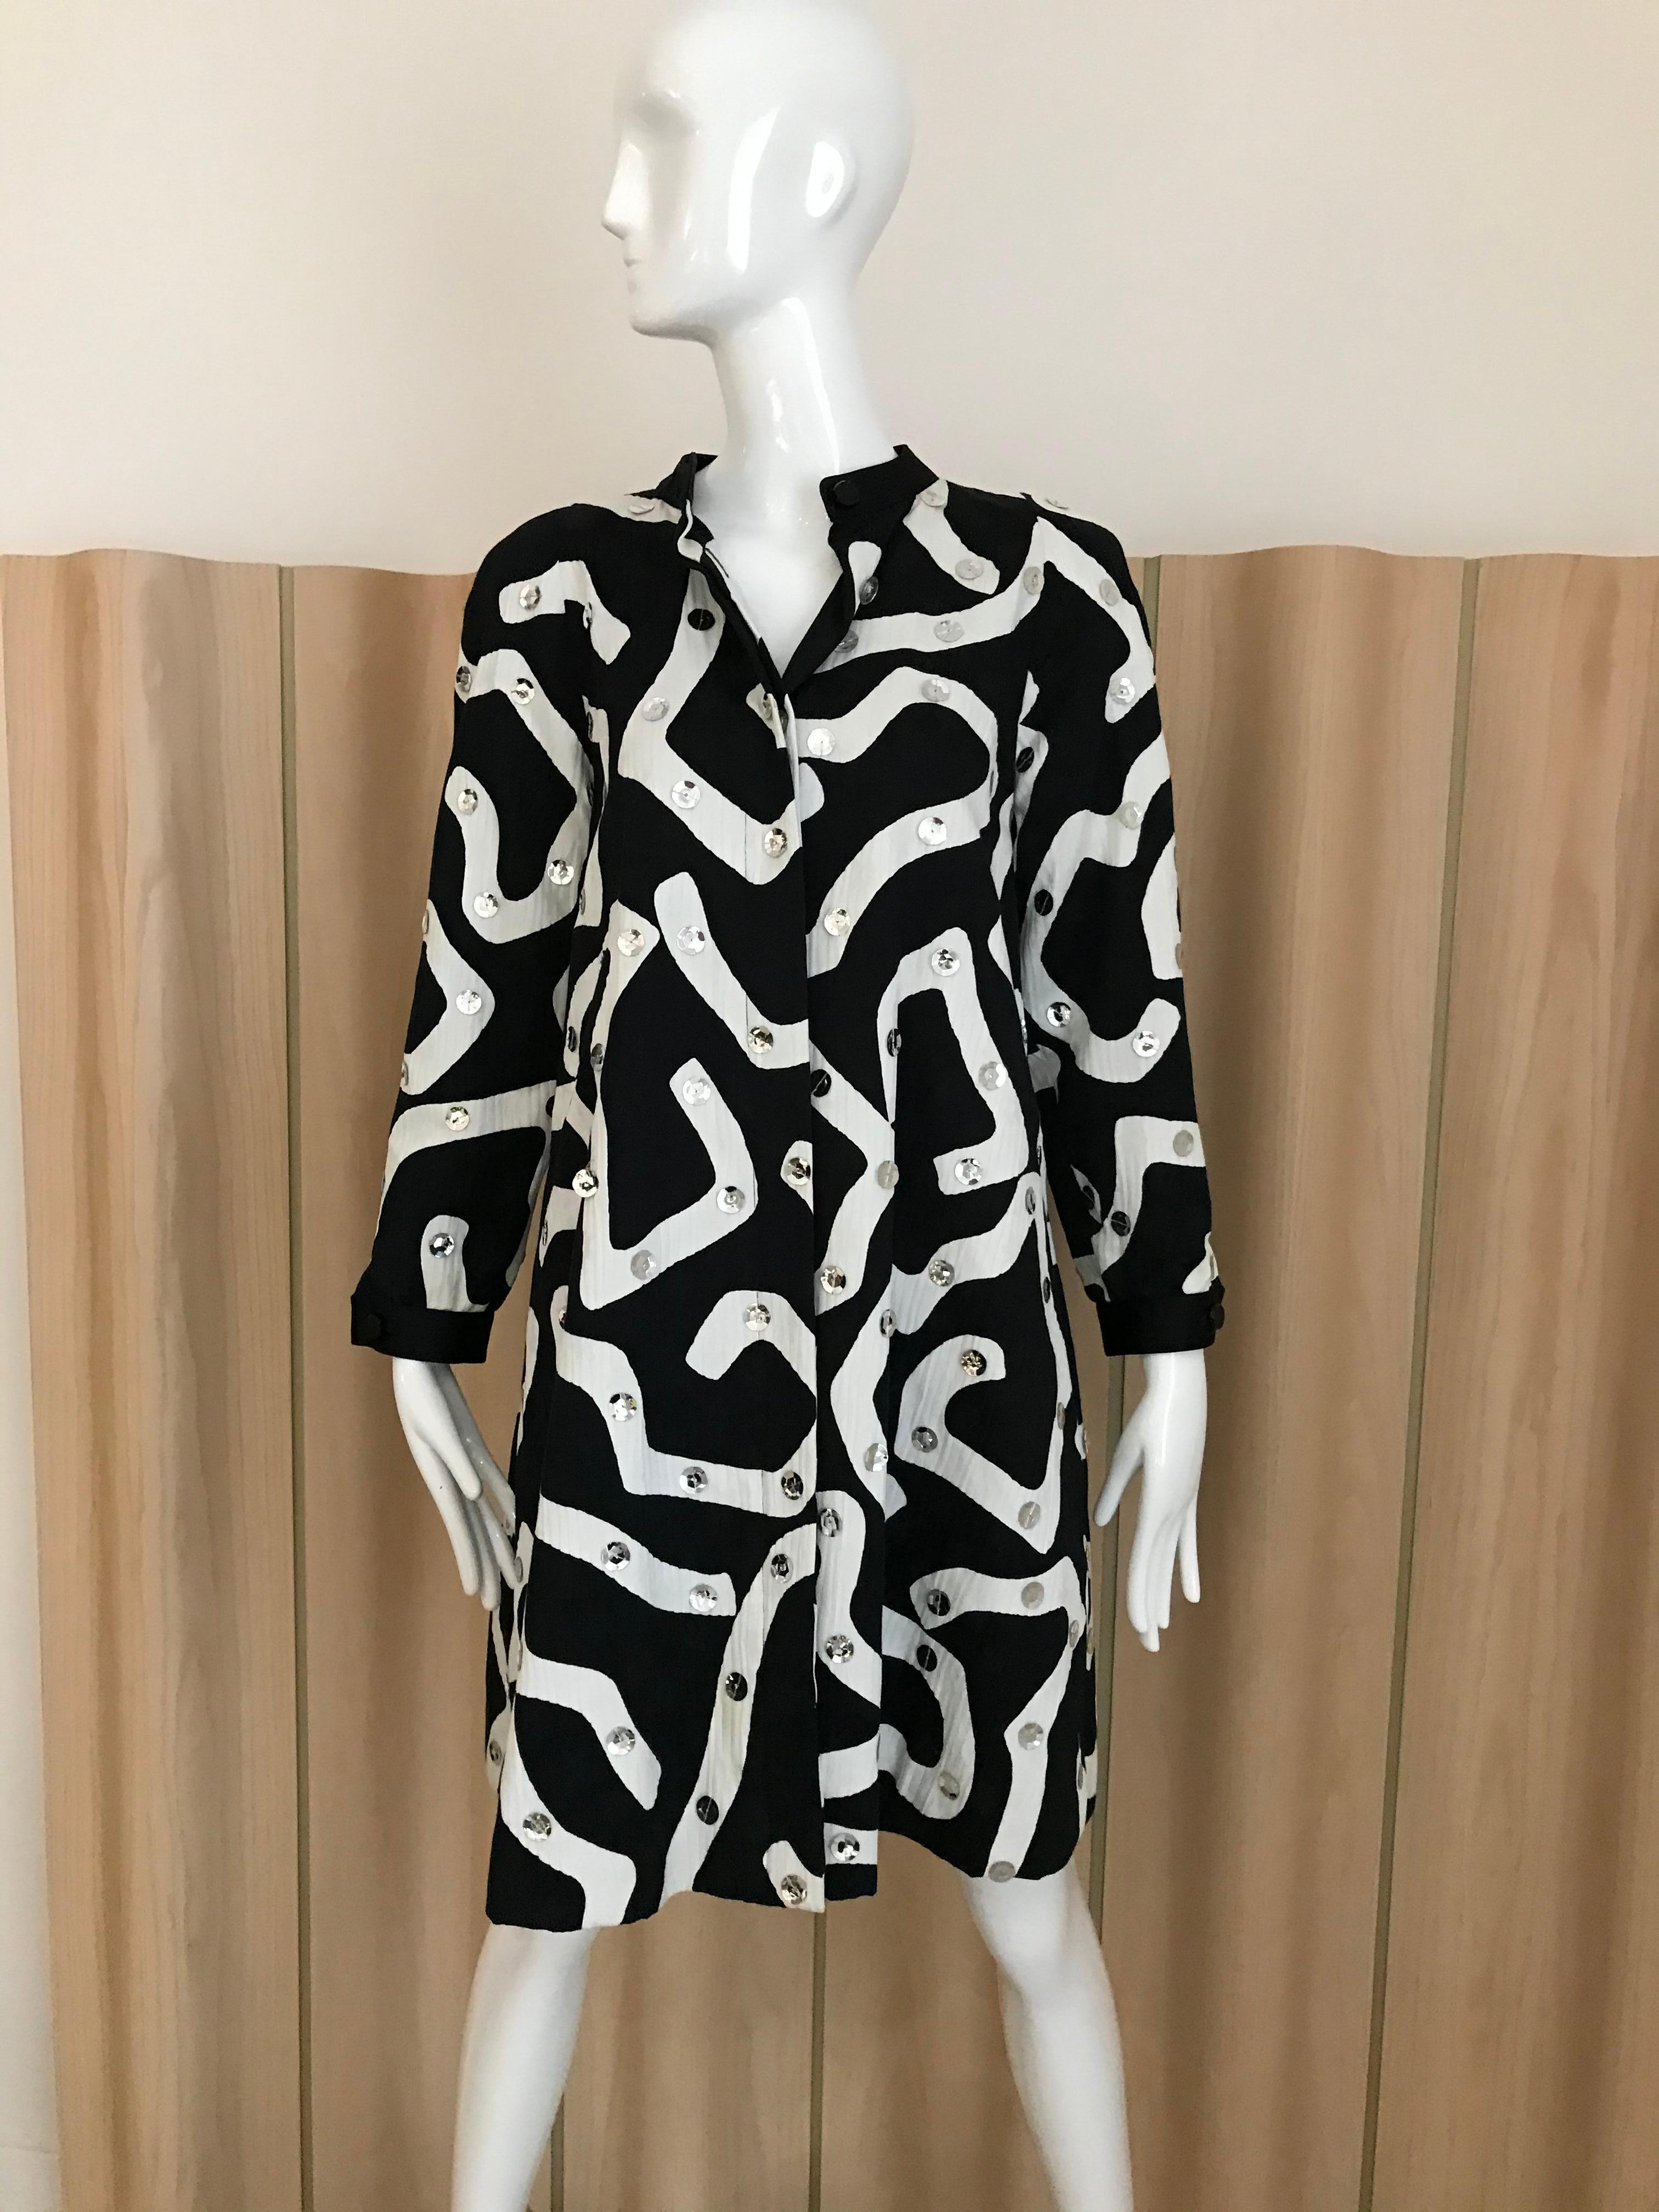 80s Geoffrey Beene black and white abstract print cotton  Dress with large silver sequin. Tent style with inverted pleat at the back.  Dress/coat has pocket

Size : 8/10 / Medium 

***All Clothing has been professionally Dry Cleaned and ready to